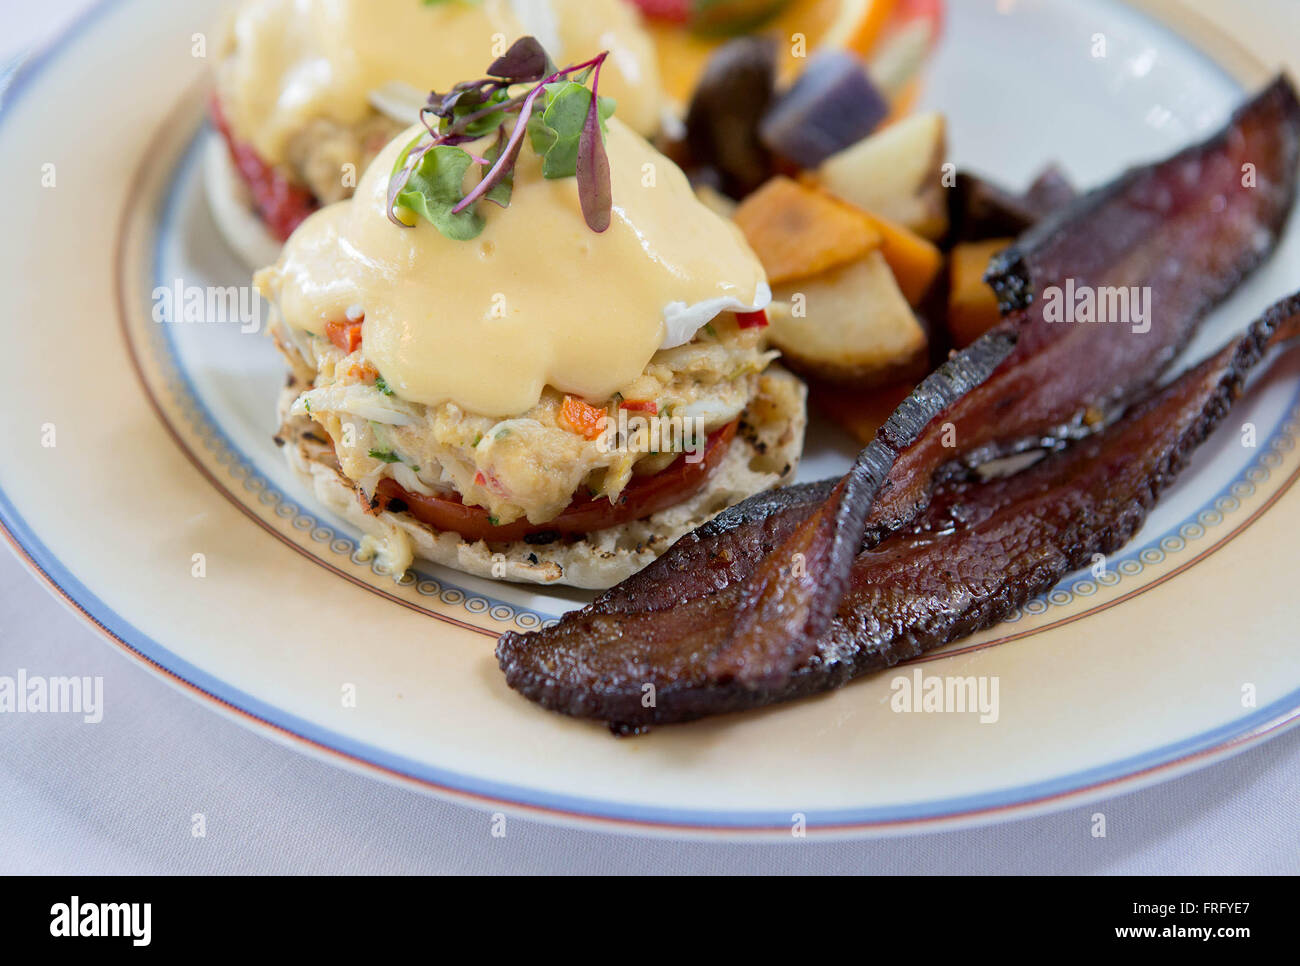 West Palm Beach, Florida, USA. 22nd Mar, 2016. Ocean Bleu Eggs Benedict, crab, grilled heirloom tomatoes, and tricolor potato medley, with a side of Millionaires Bacon. Ocean Bleu was voted best brunch spot in Palm Beach County by Palm Beach Post readers. © Allen Eyestone/The Palm Beach Post/ZUMA Wire/Alamy Live News Stock Photo